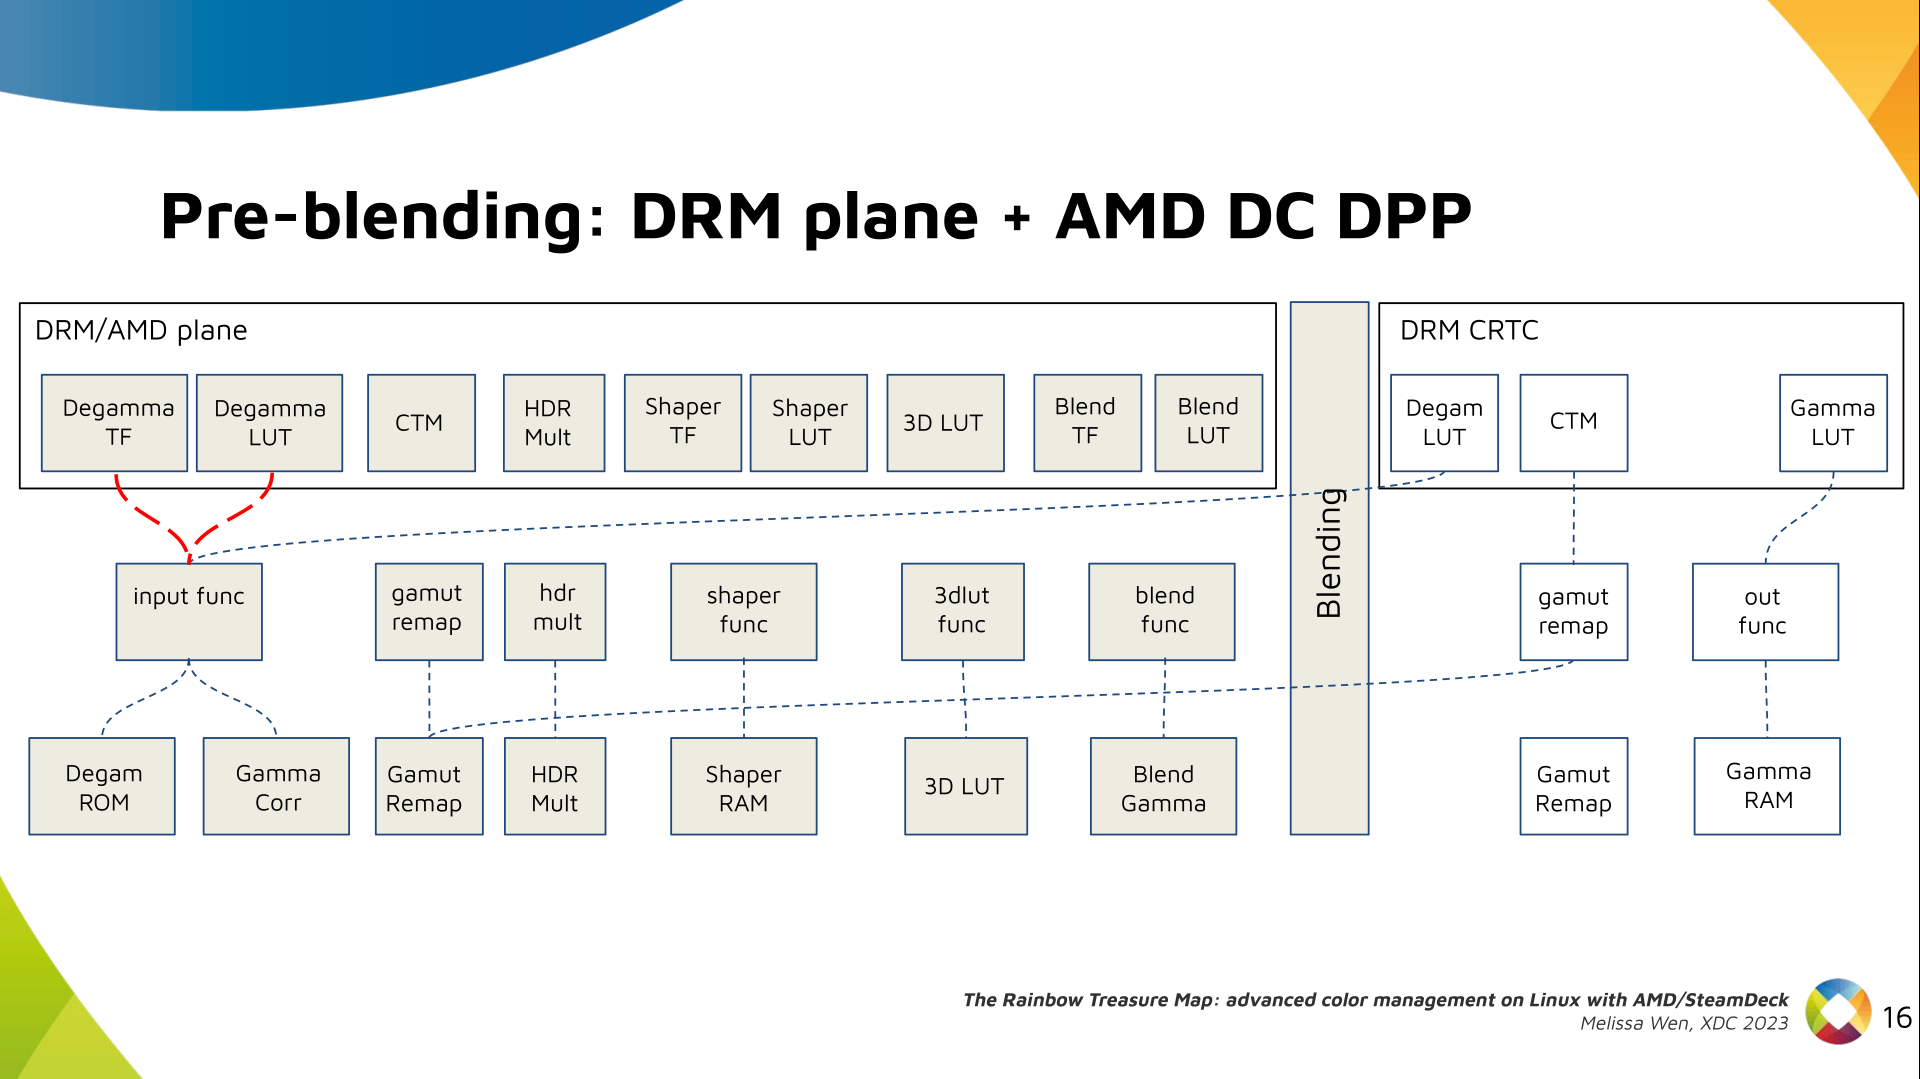 Slide 15: Color Pipeline Diagram connecting AMD plane degamma properties, LUT and TF, to AMD DC resources